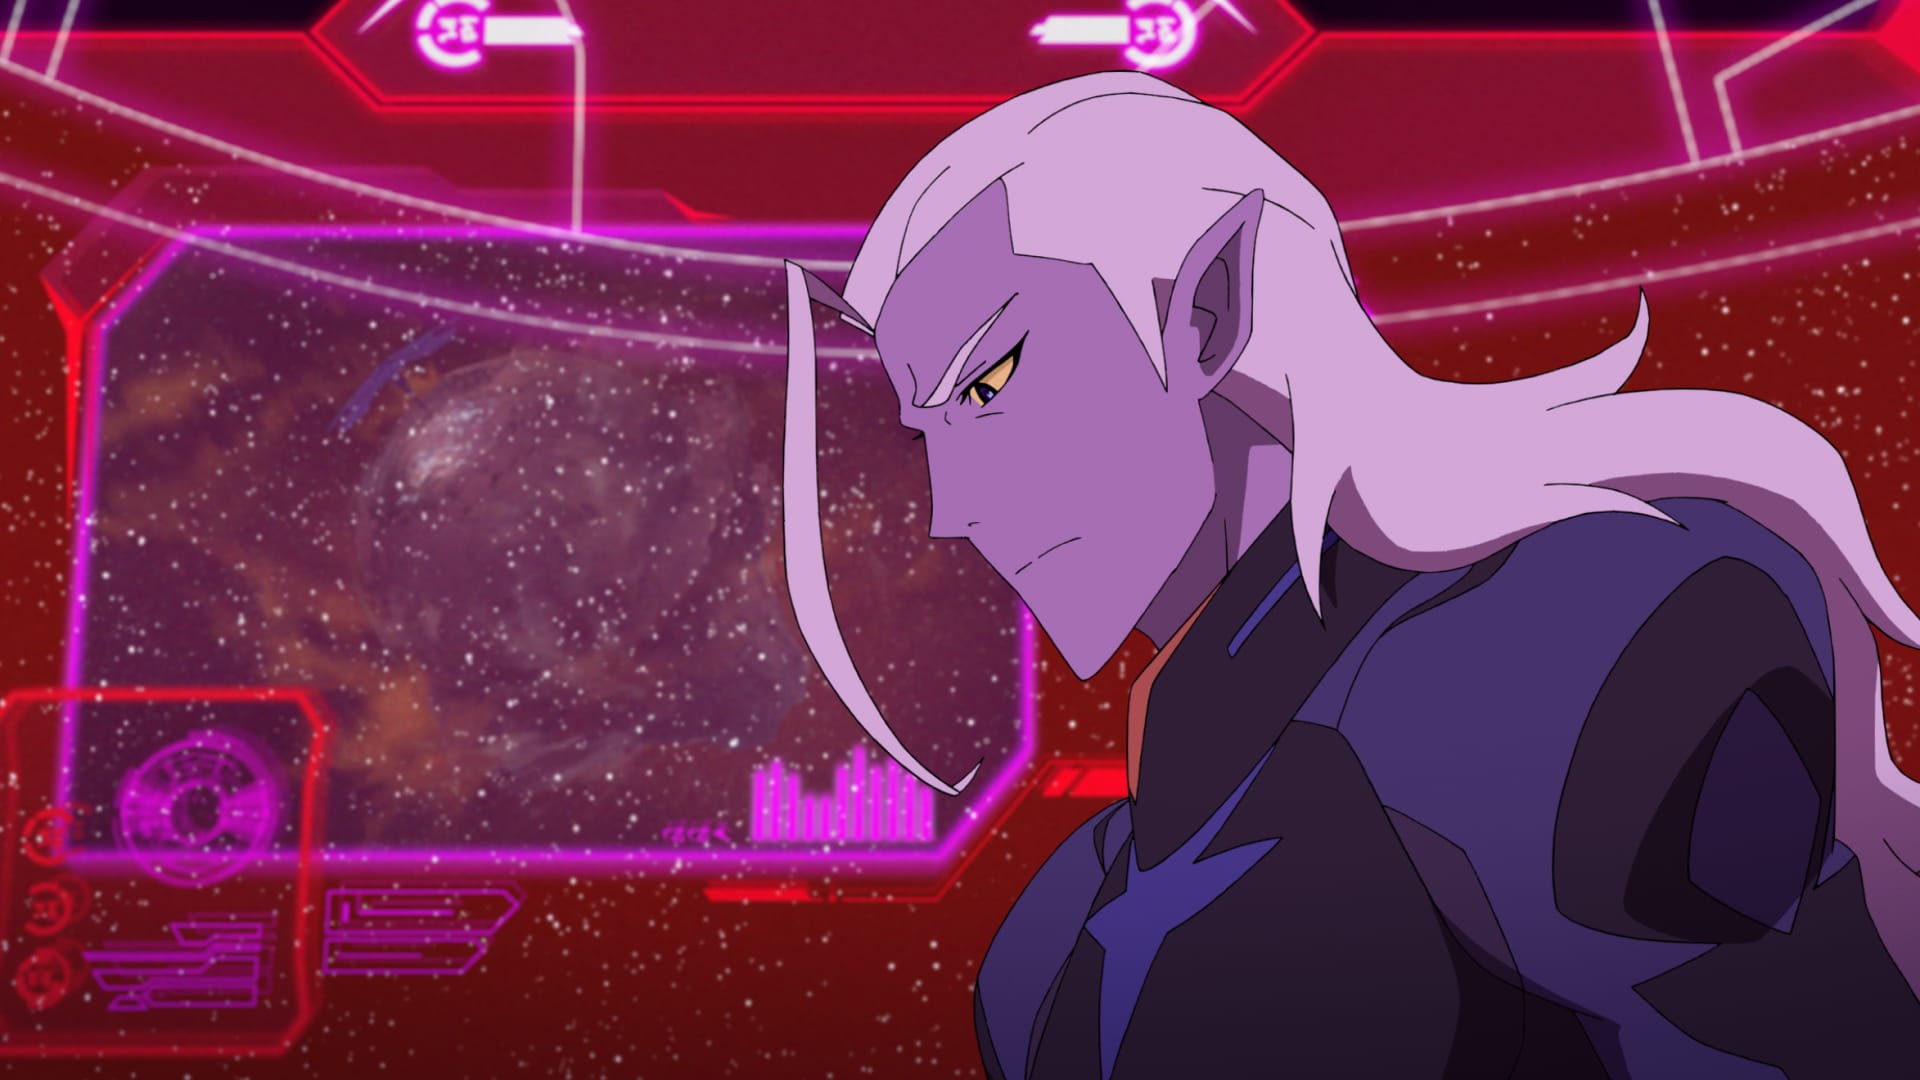 Prince Lotor carries the heavy burden of his family and heritage. 